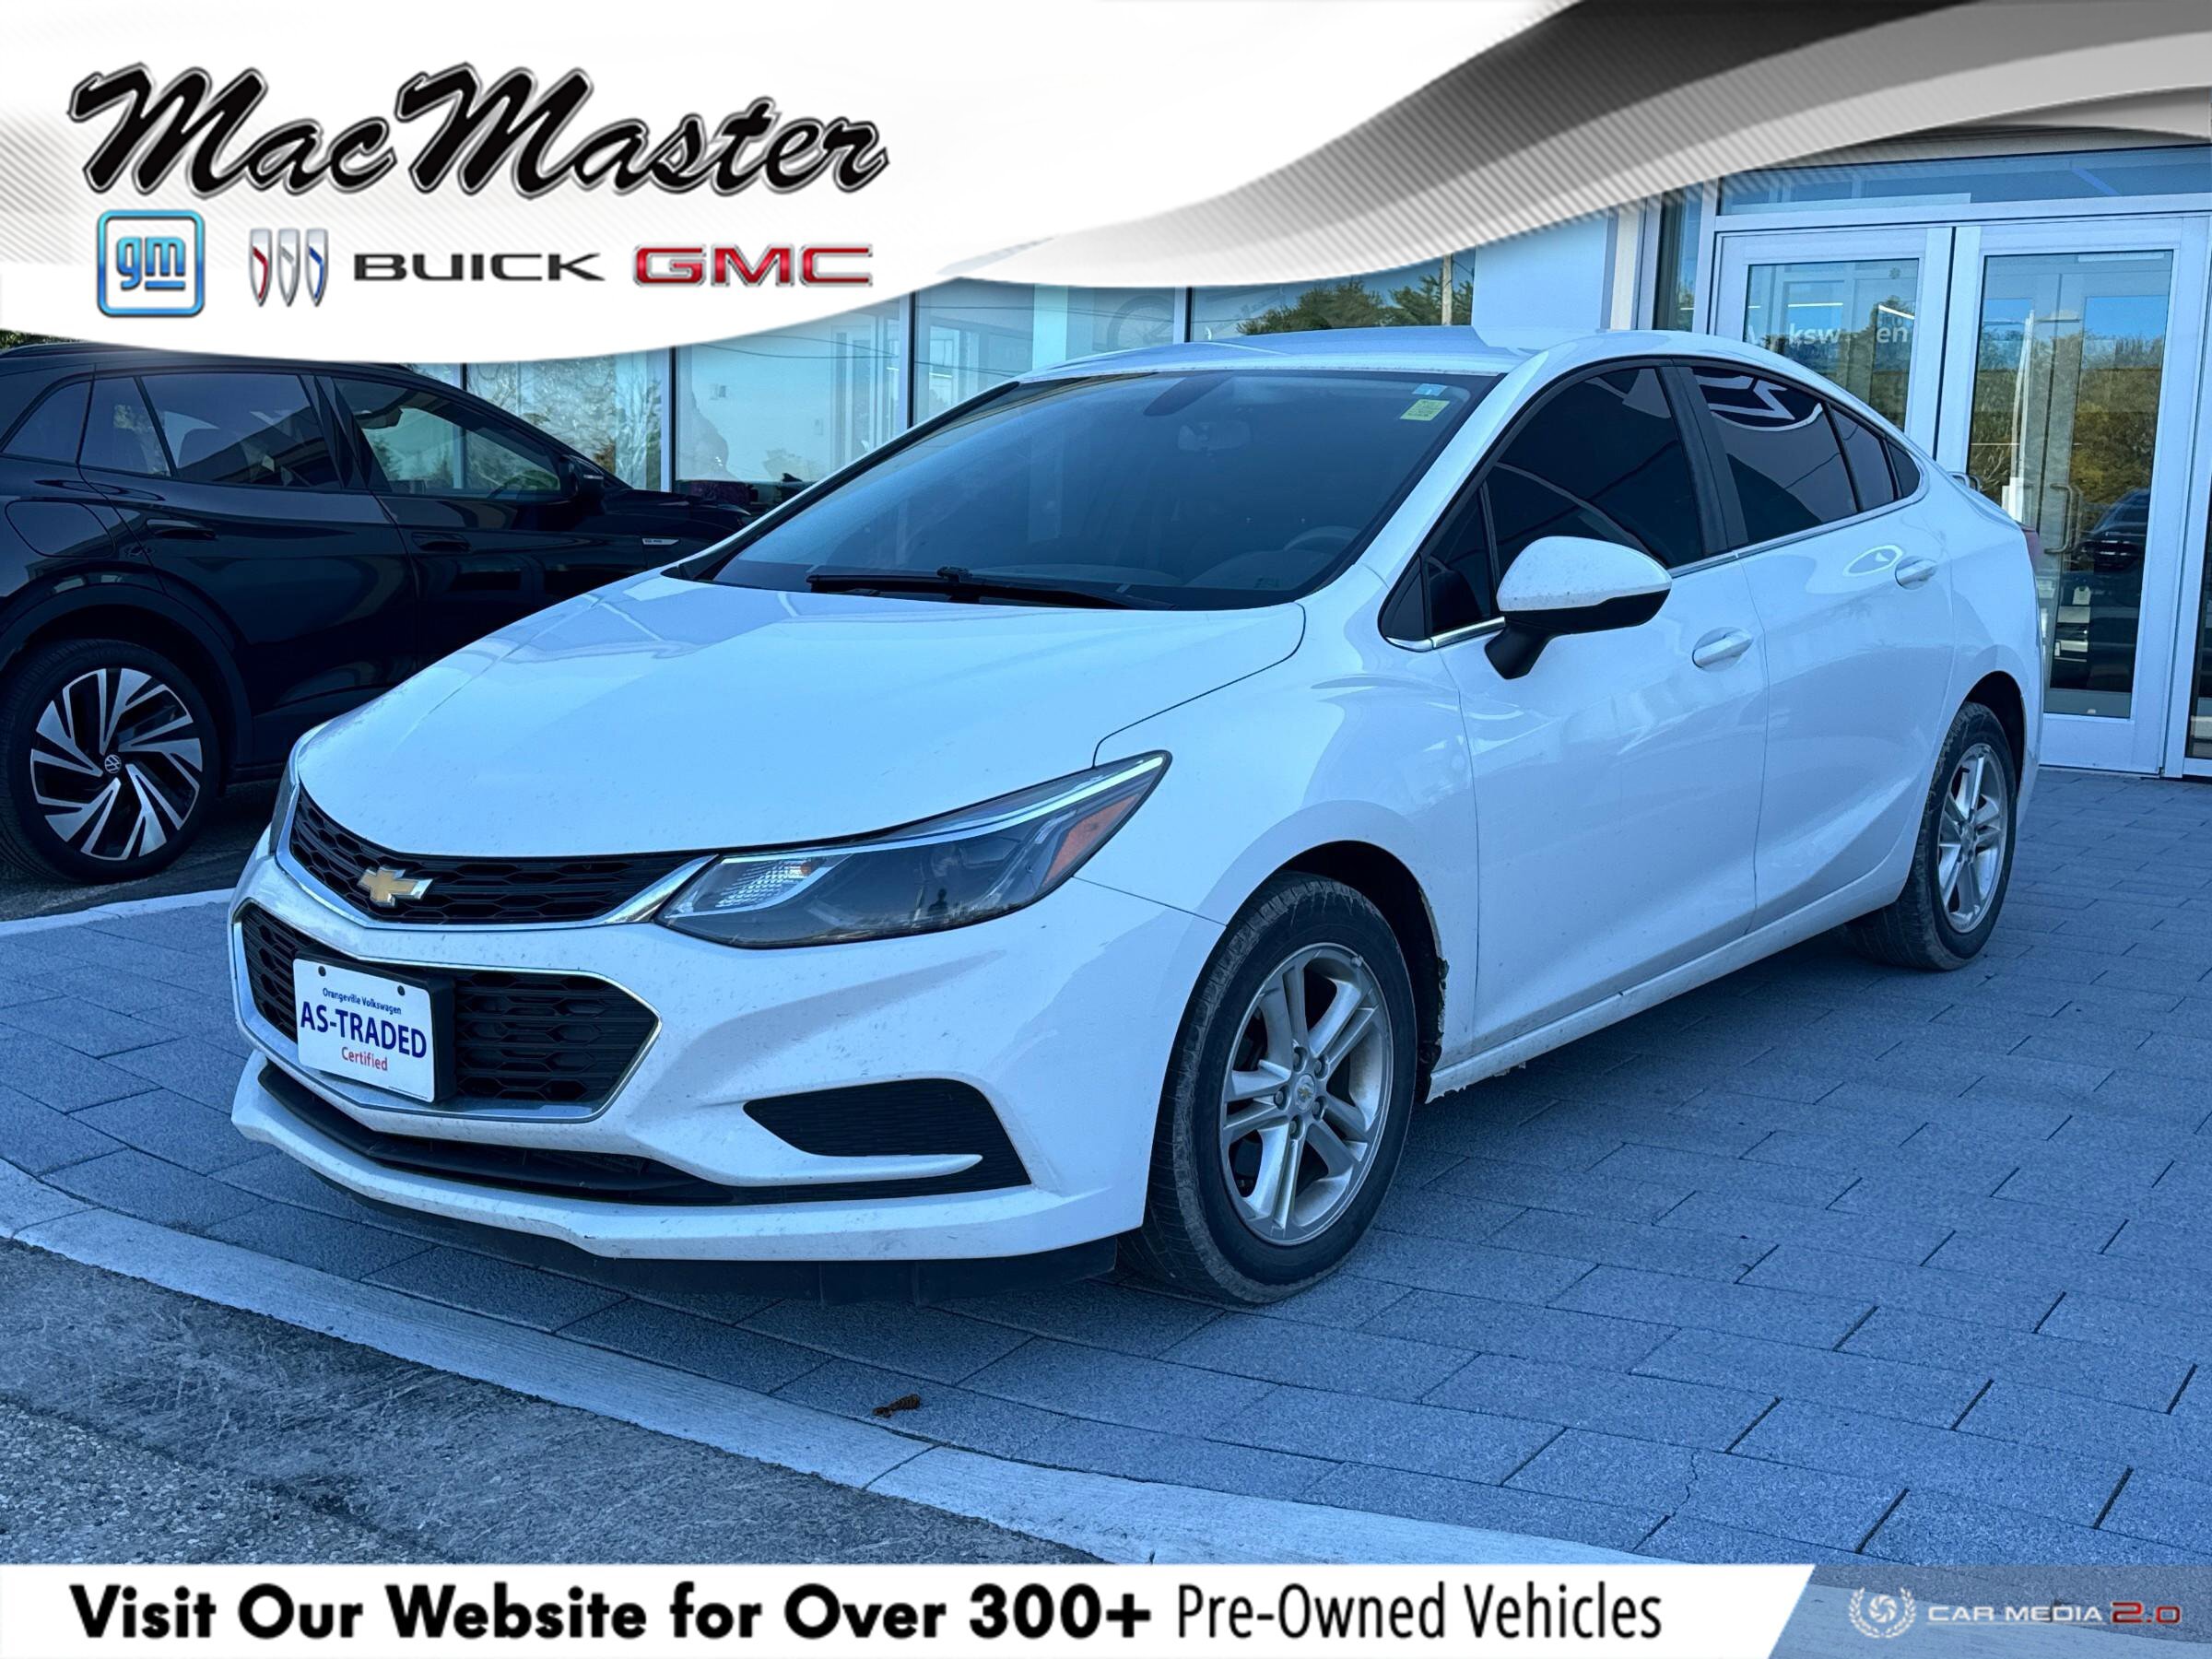 2017 Chevrolet Cruze LTAS-TRADED CERTIFIED, CLOTH, ACCIDENT-FREE